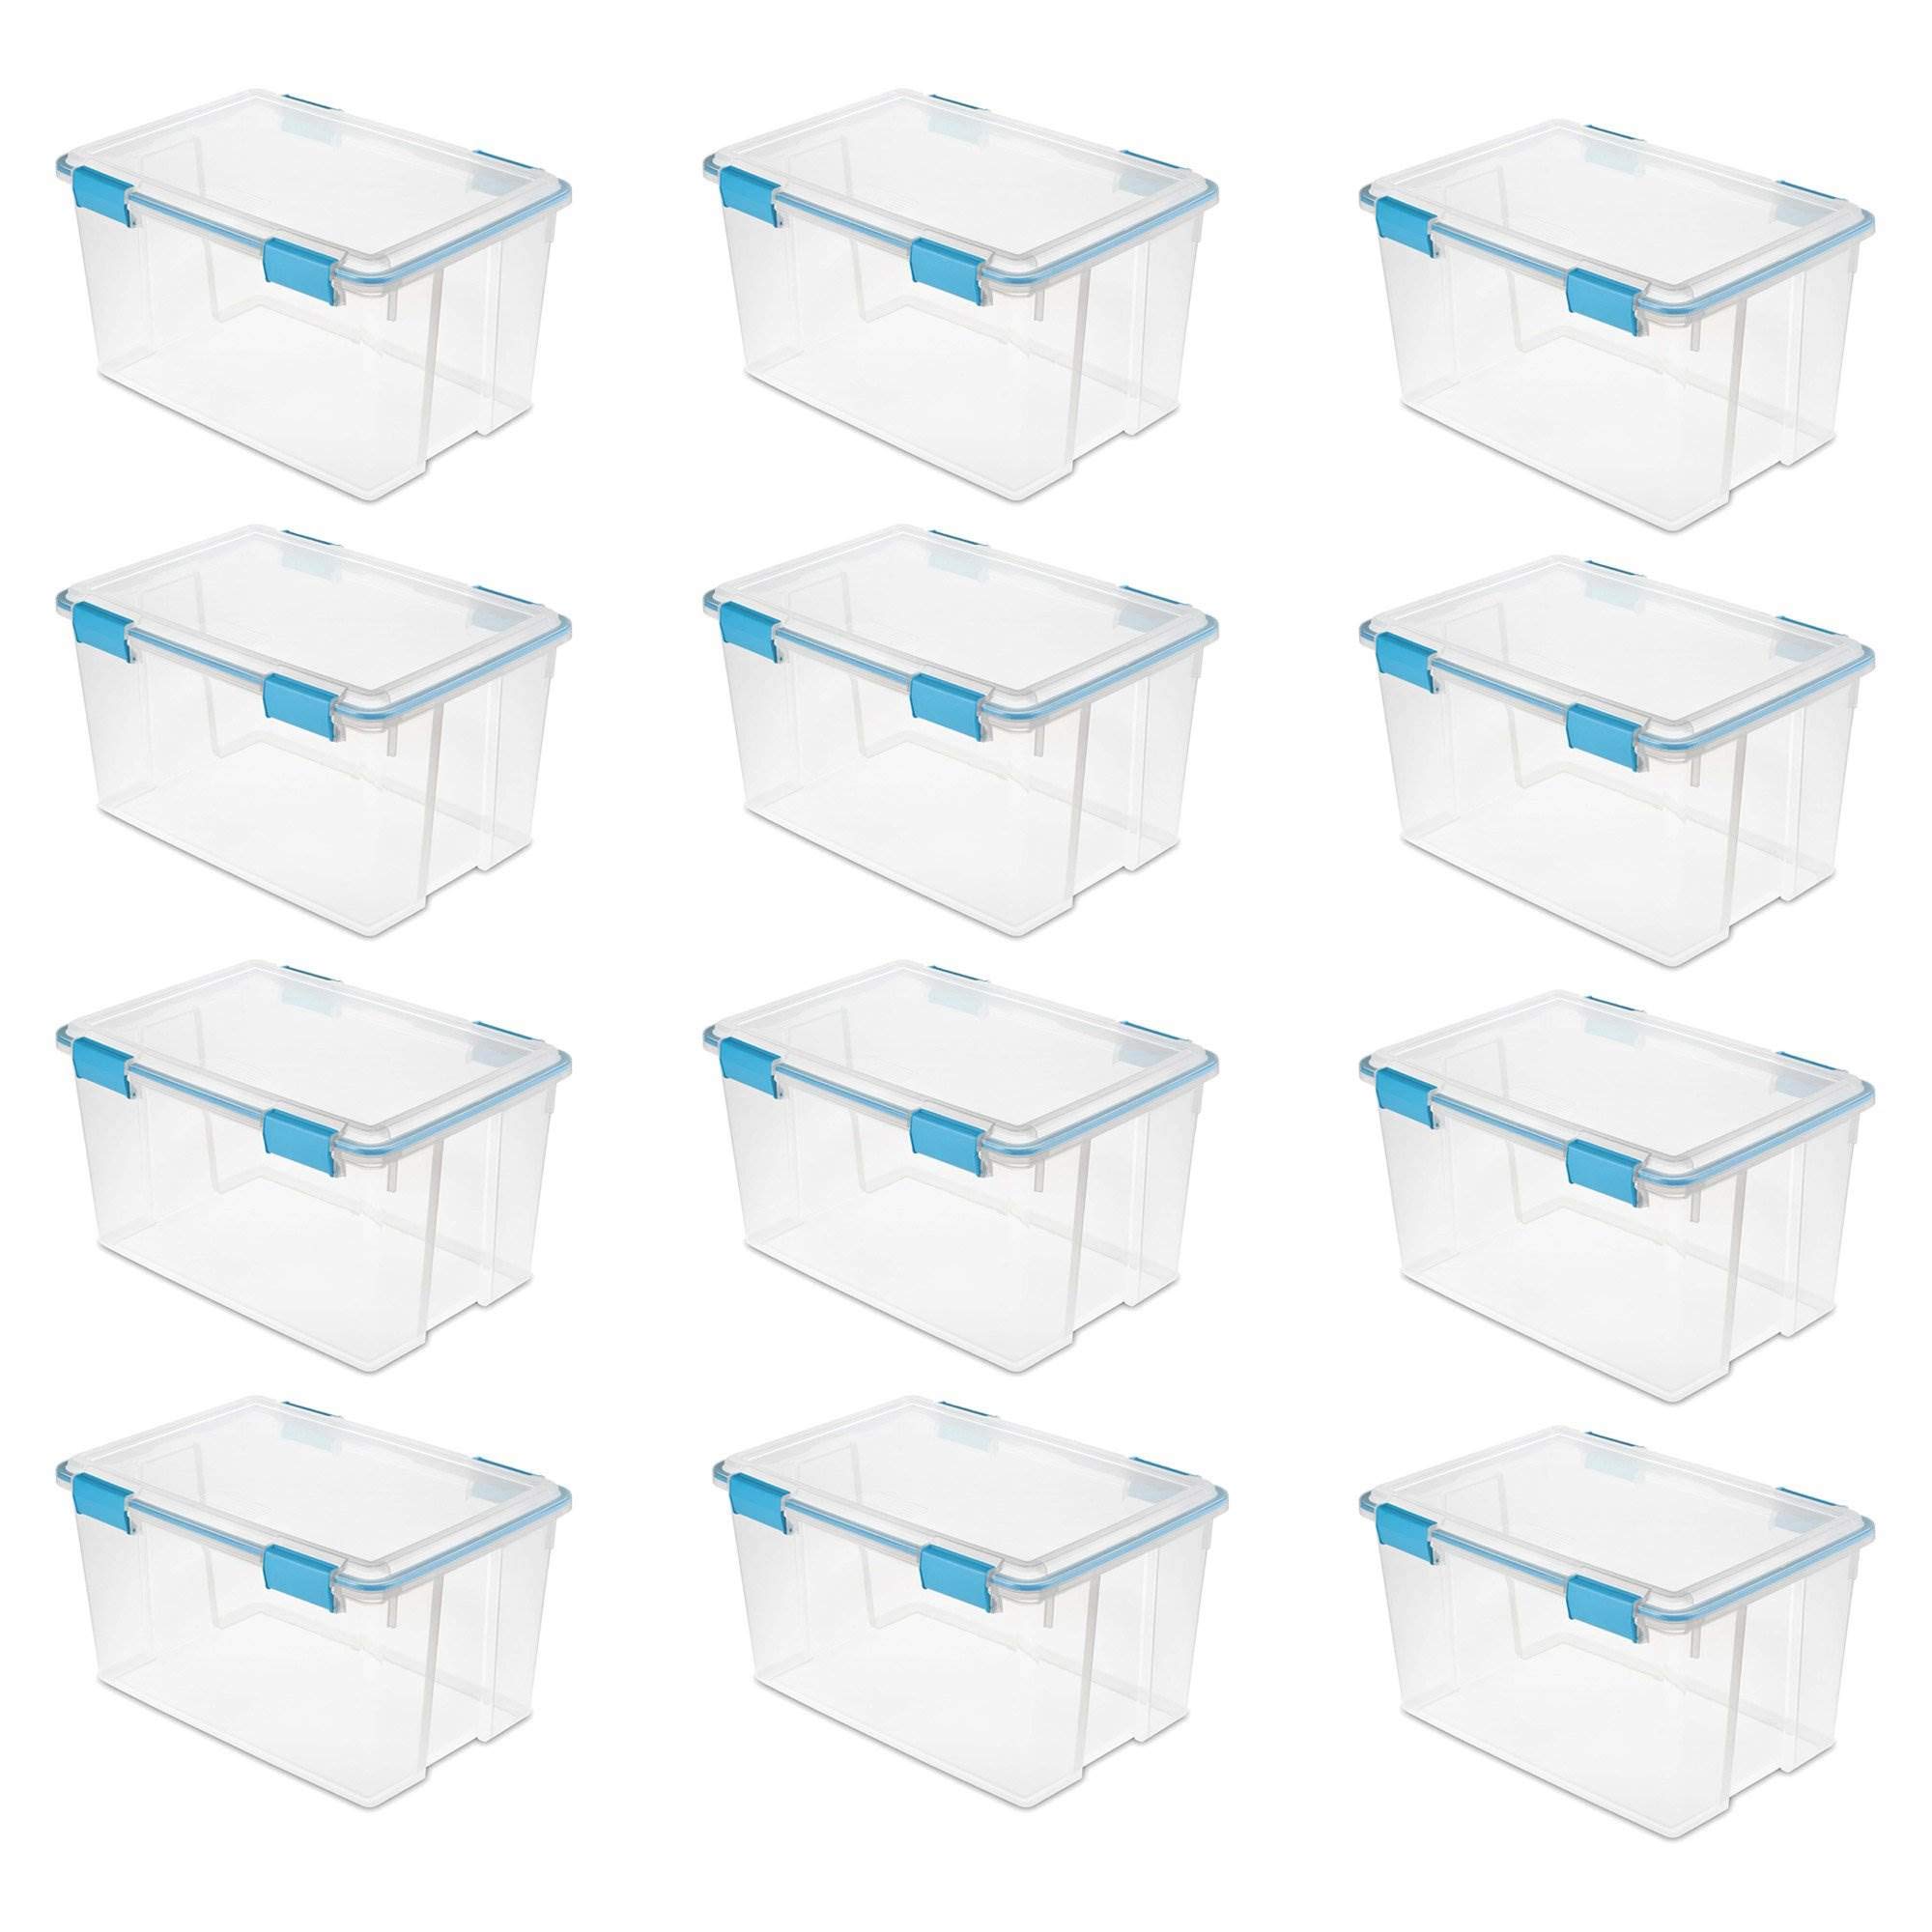 Sterilite 54 Quart Clear Plastic Stacking Storage Container Box with Latching Lid (12 Pack)